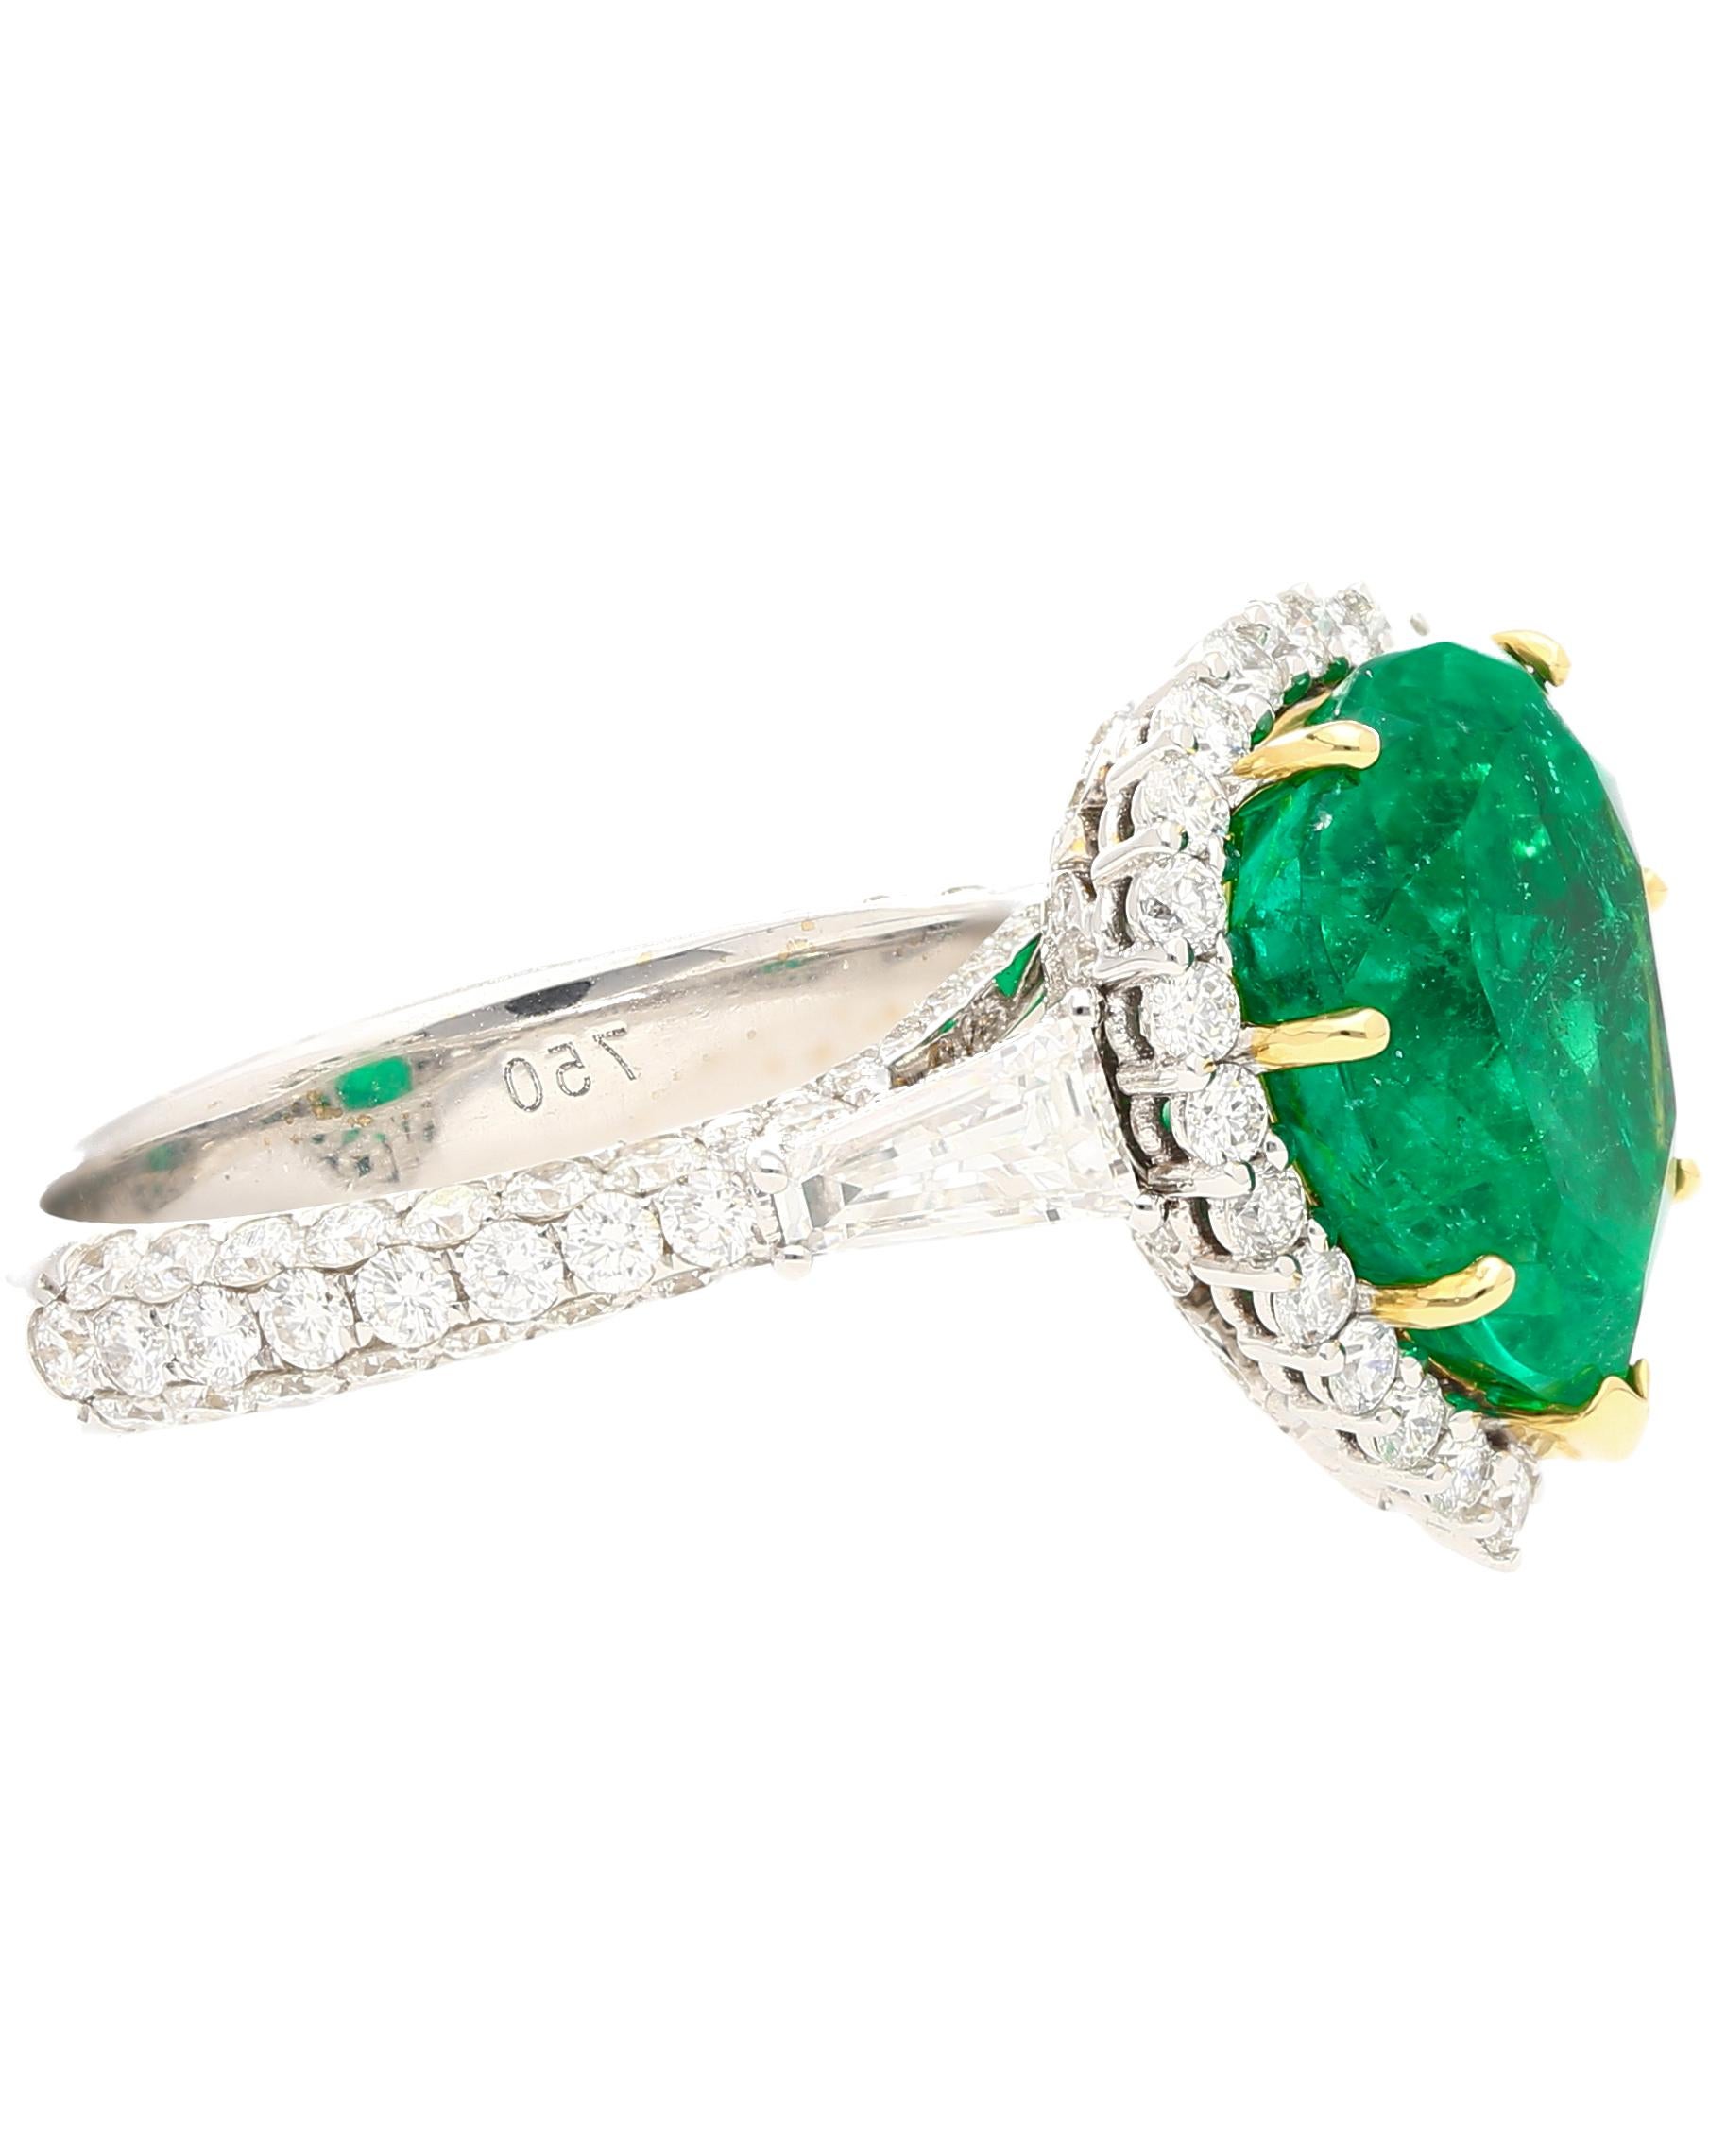 5.12 Carat Vivid Green Pear Cut Colombian Emerald and Diamond Ring in 18K Gold In New Condition For Sale In Miami, FL